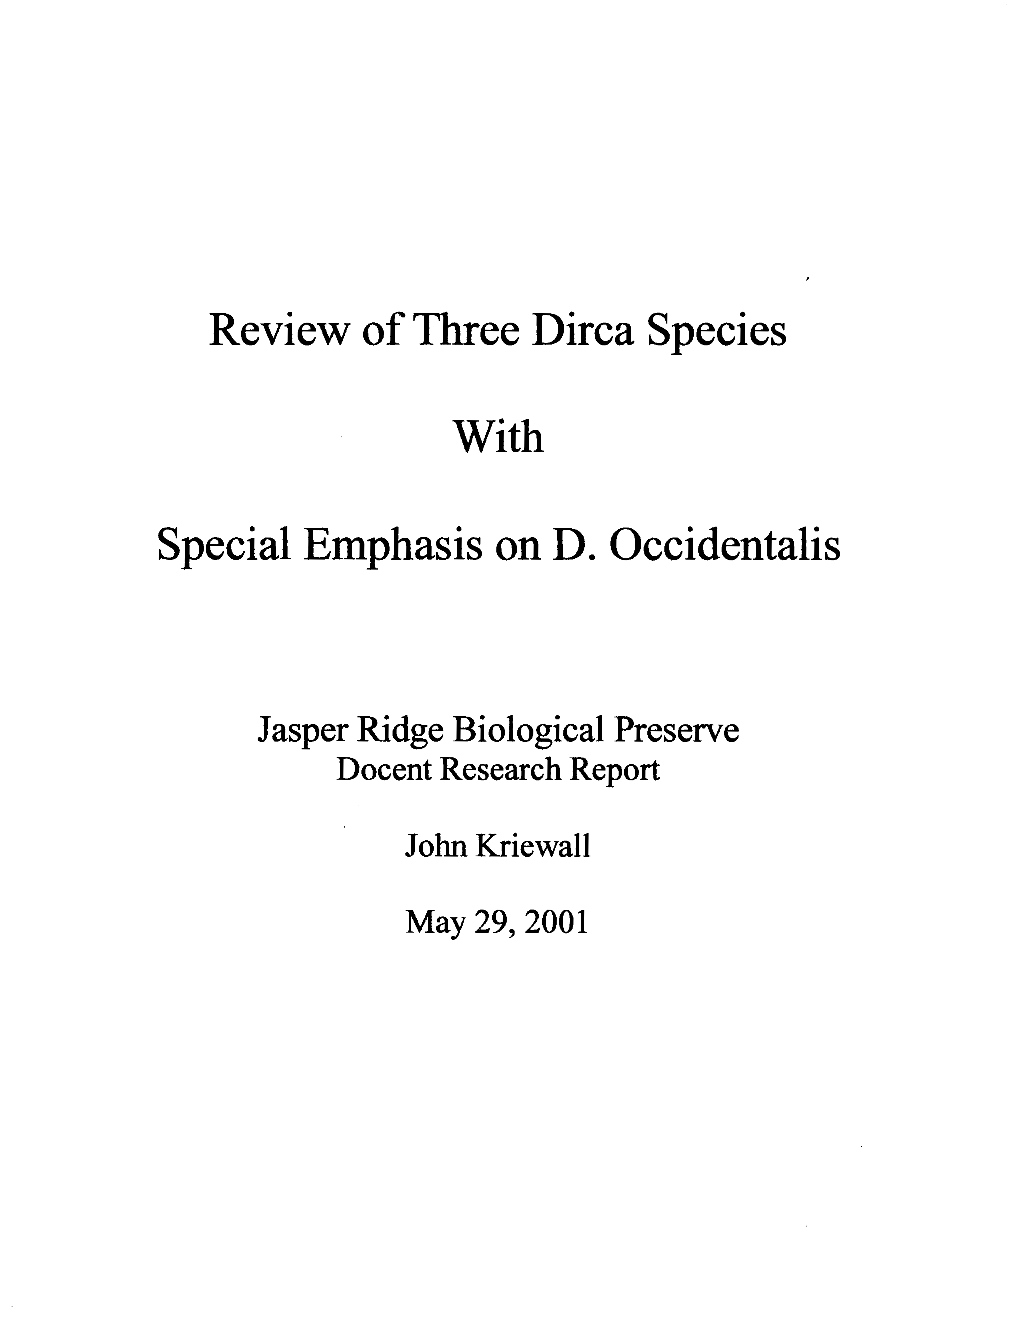 Review of Three Dirca Species with Special Emphasis on D. Occidentalis Background